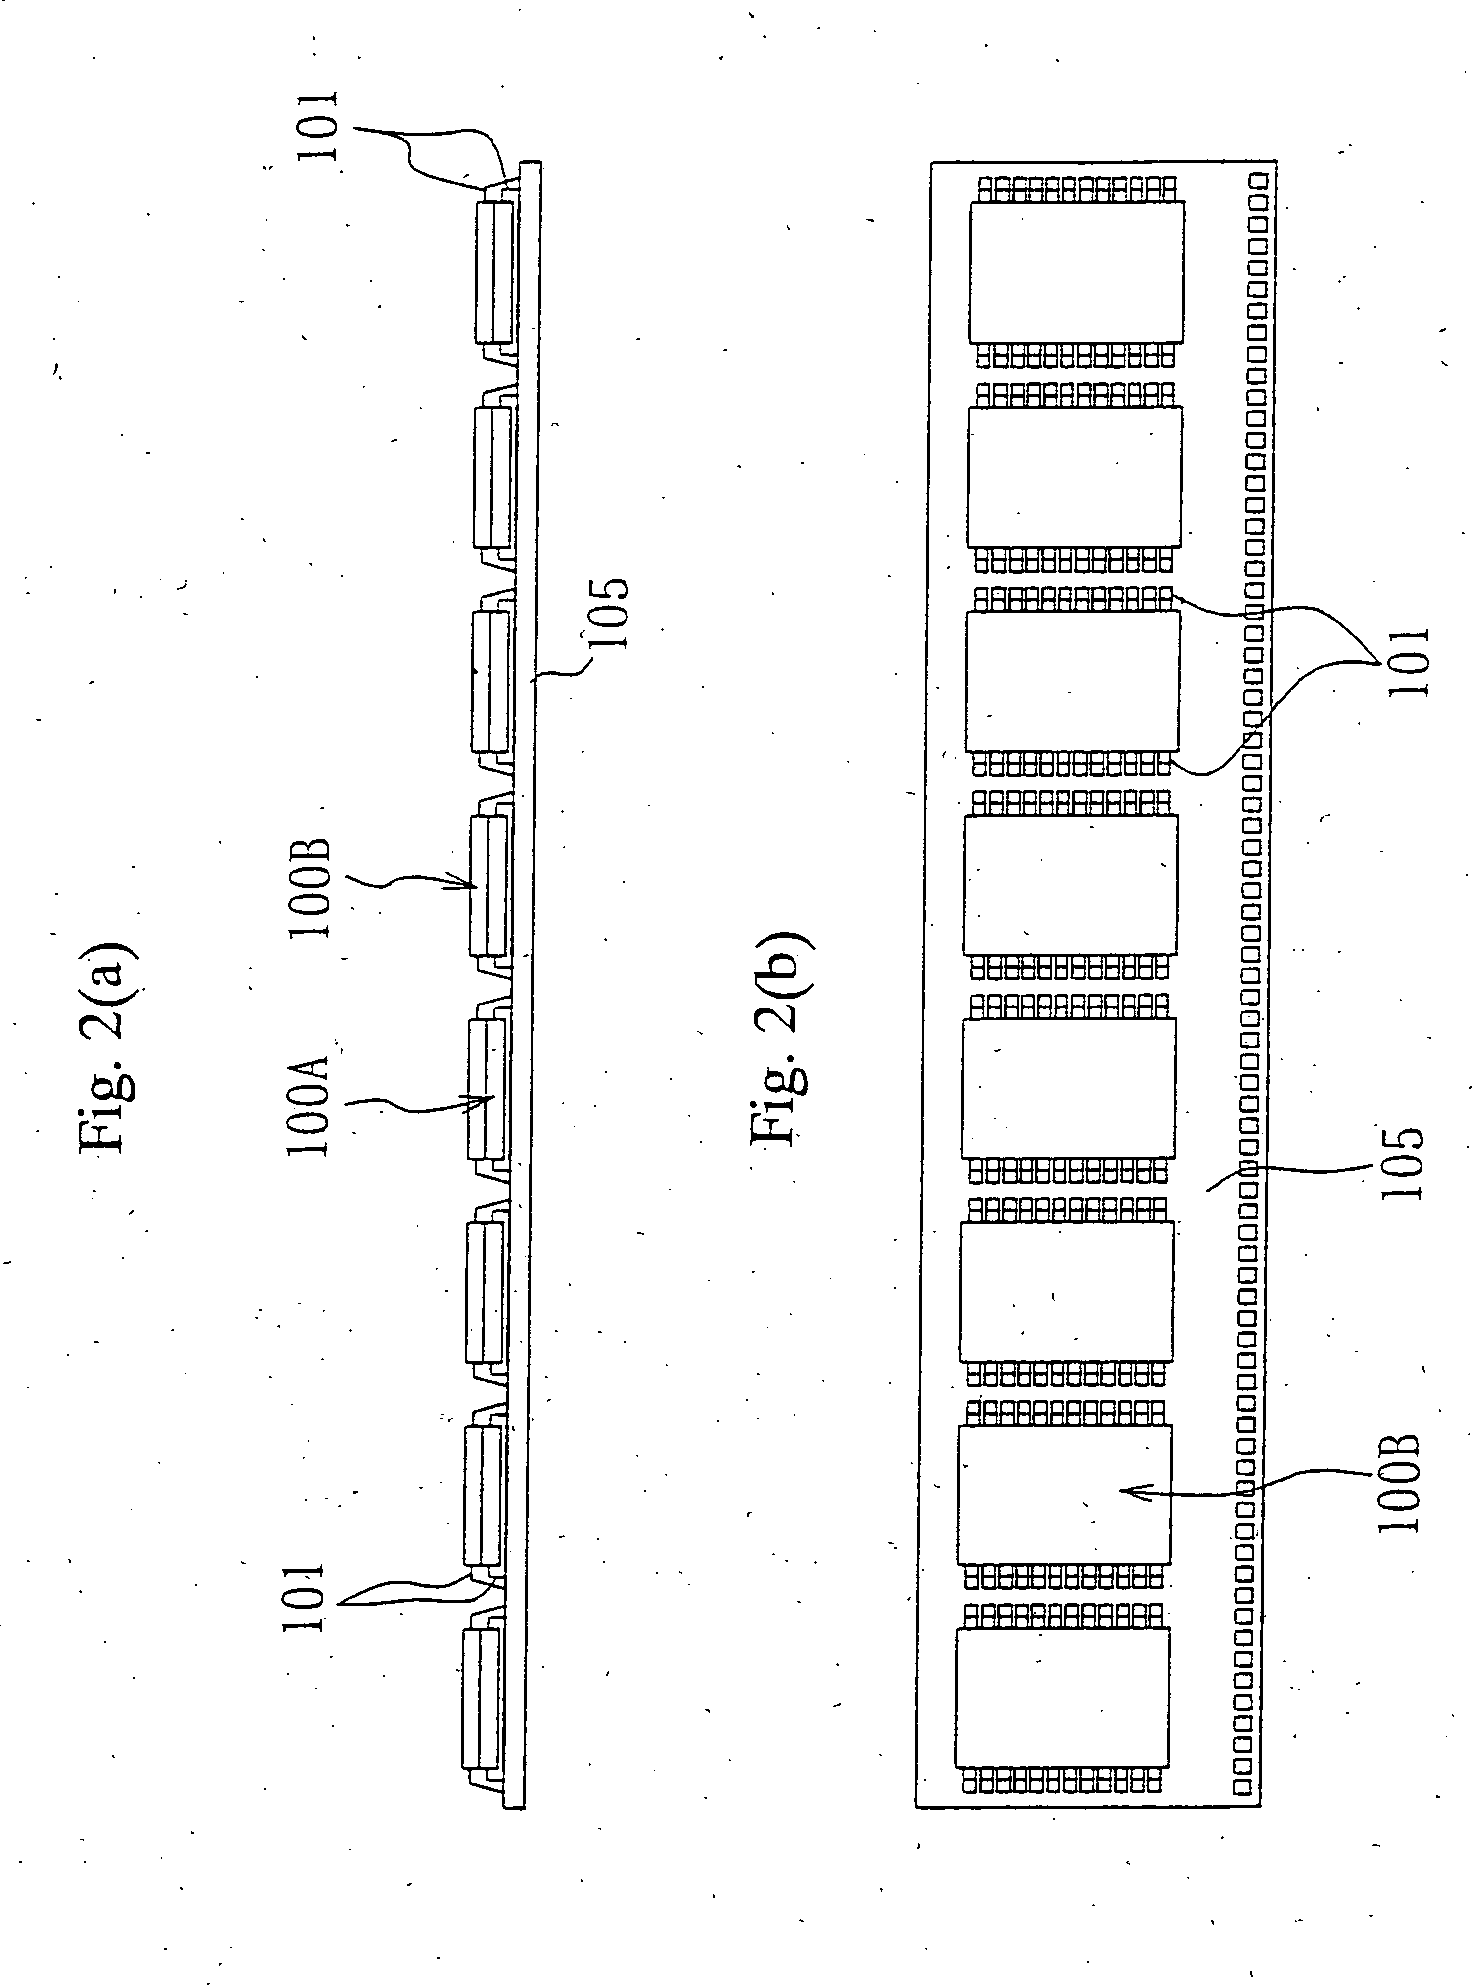 Semiconductor chip mounting wiring board, manufacturing method for same, and semiconductor module